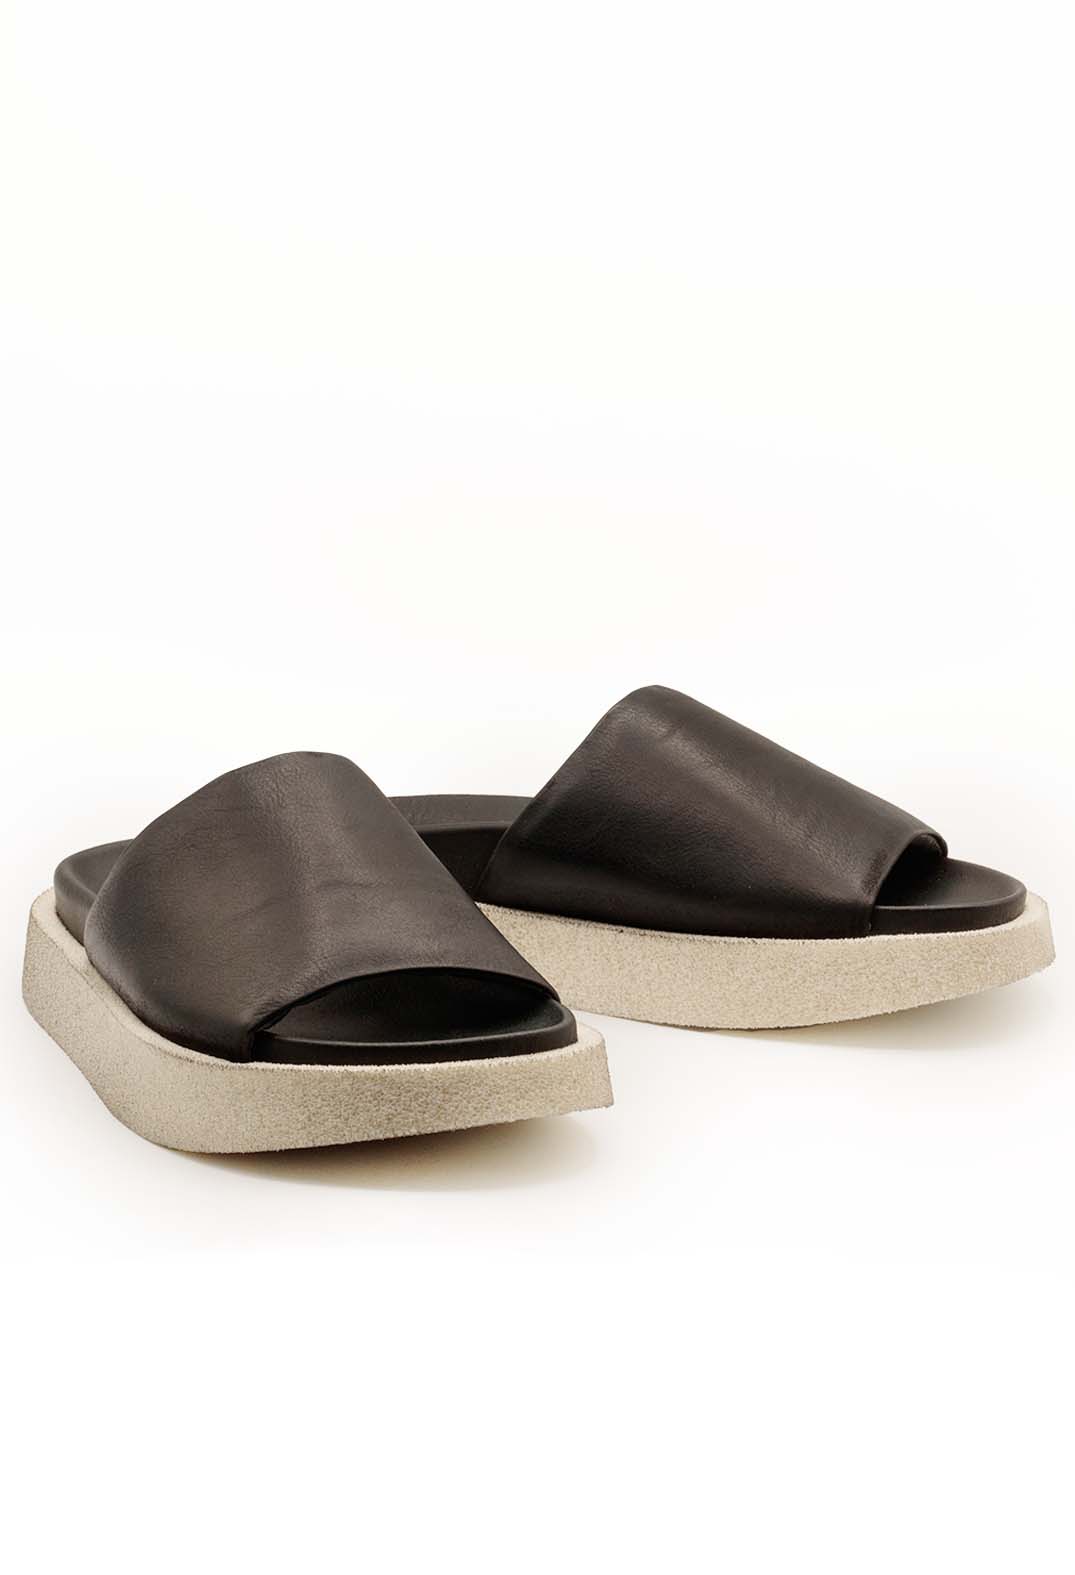 Wide Strap Sliders with Contrasting Sole in Gasoline Nero